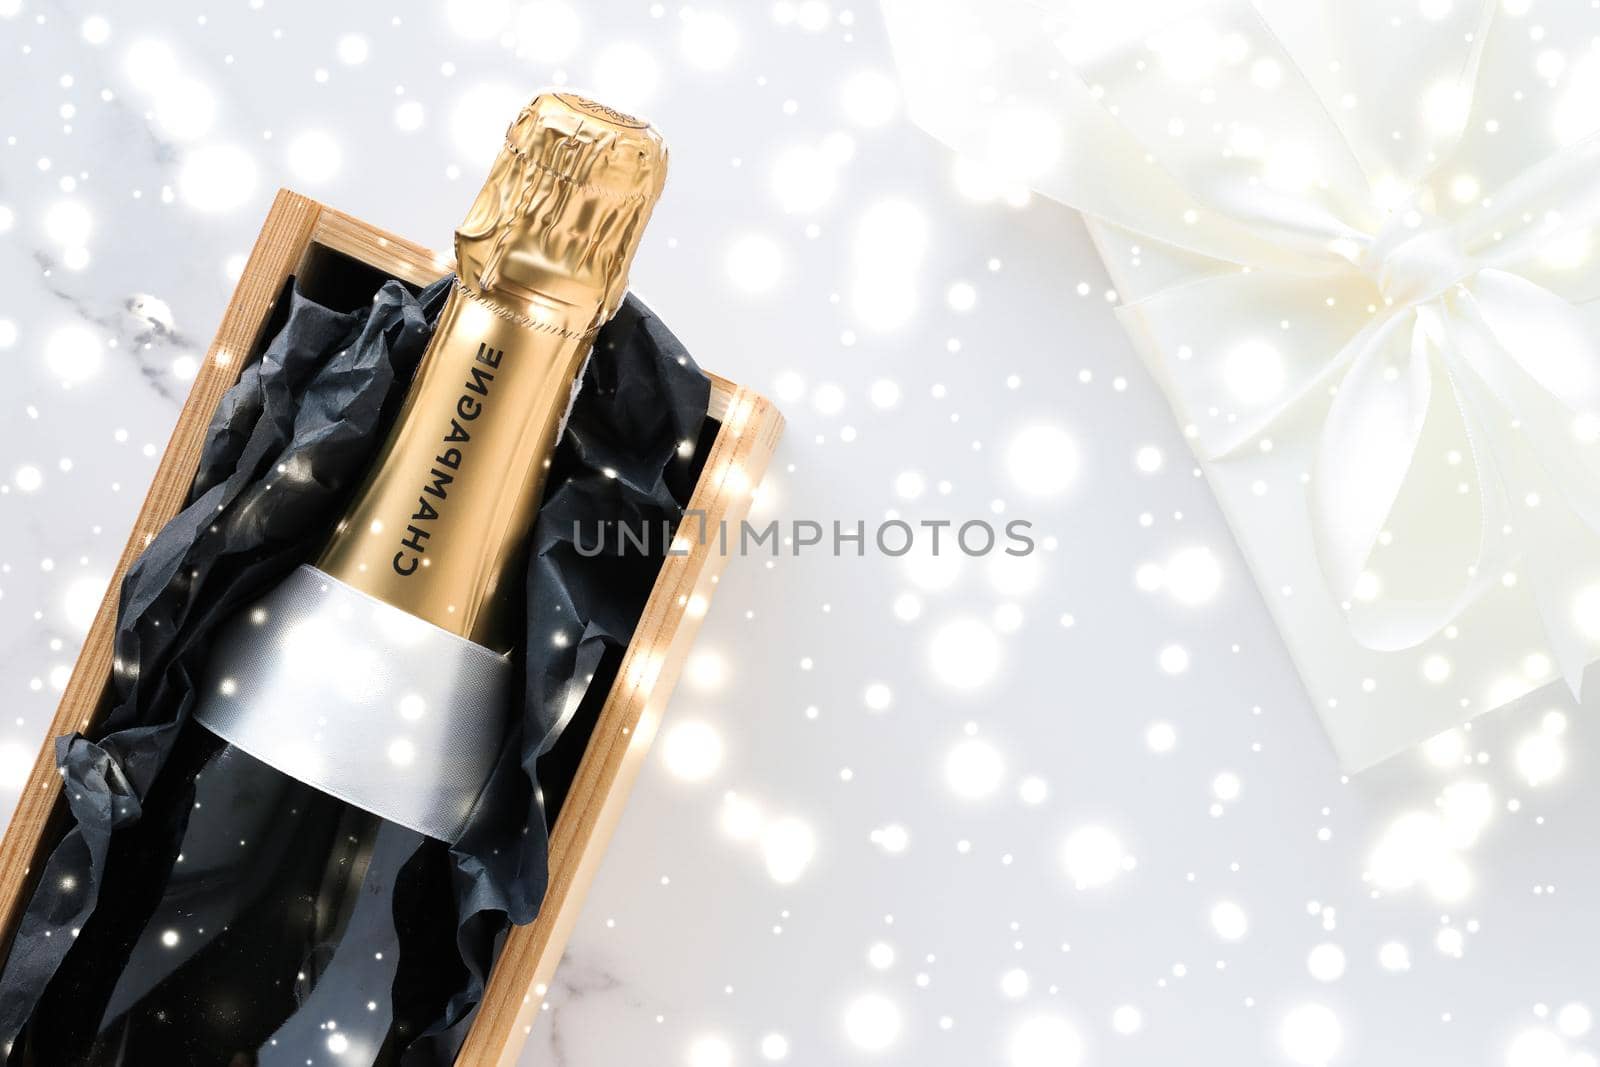 New Years Eve, happy holidays and luxury present concept - Christmas holiday champagne bottle and a gift box and shiny snow on marble background